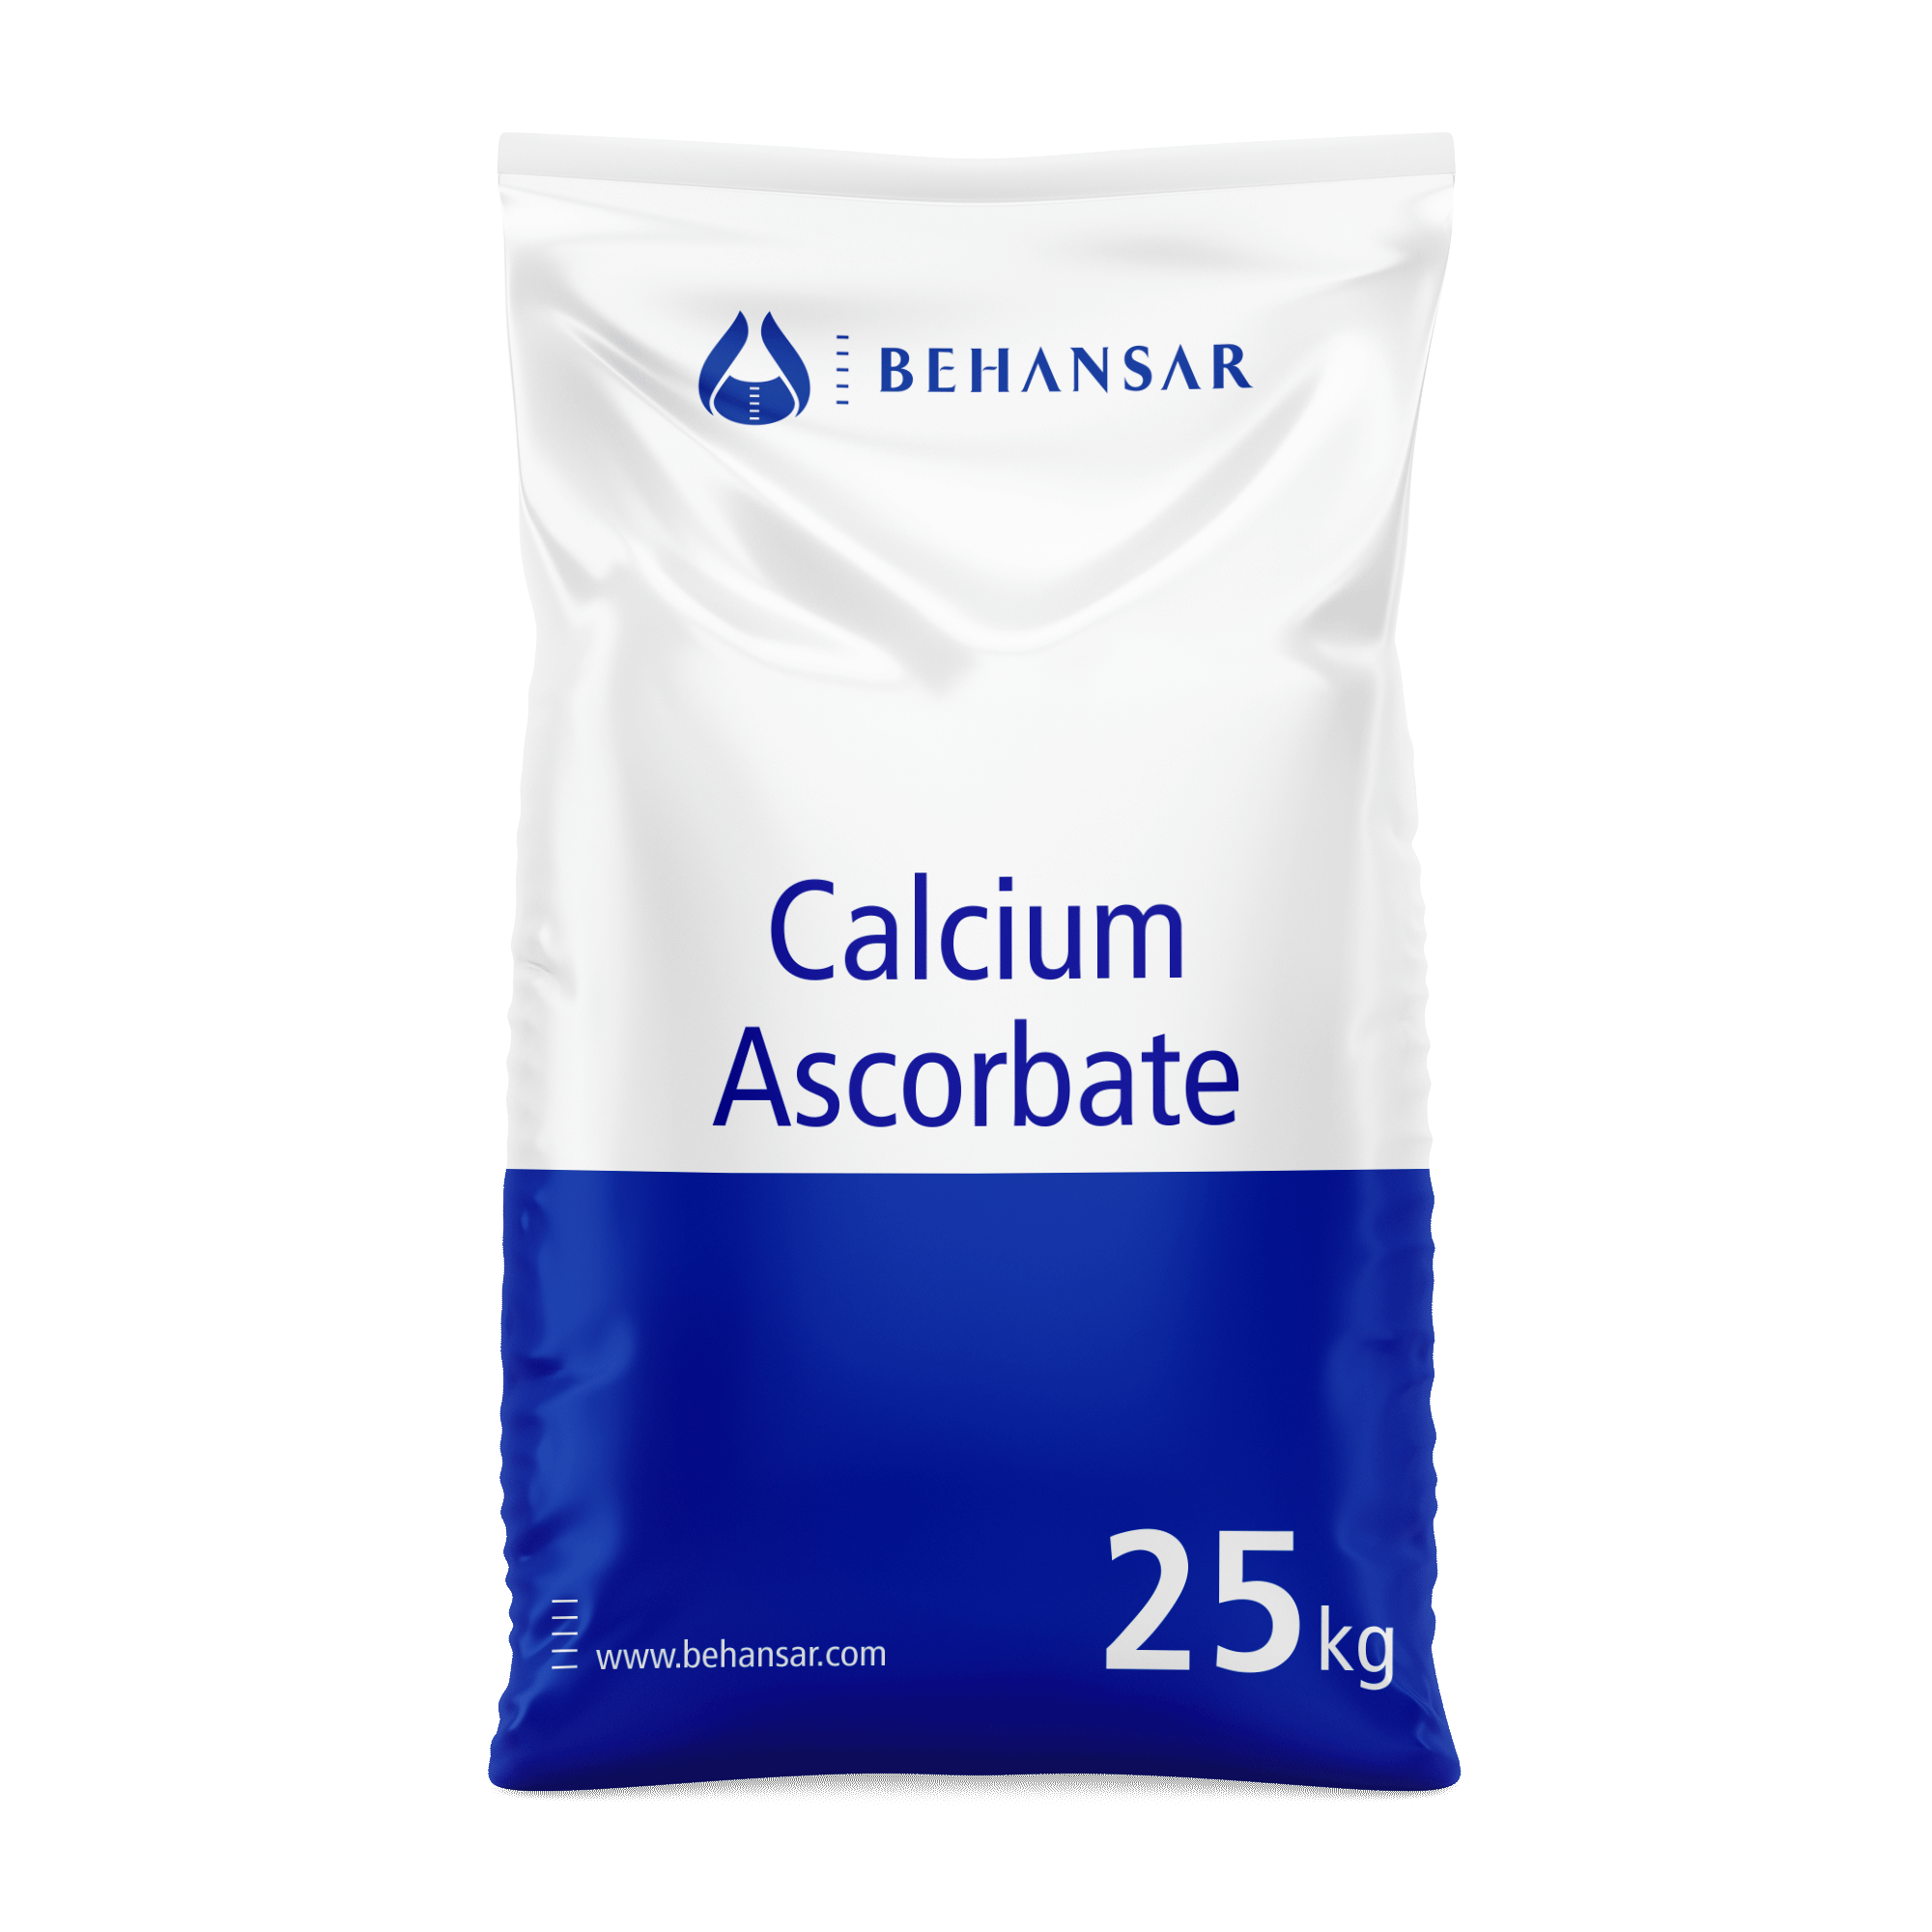 Calcium Ascorbate is one of the products of Behansar Co